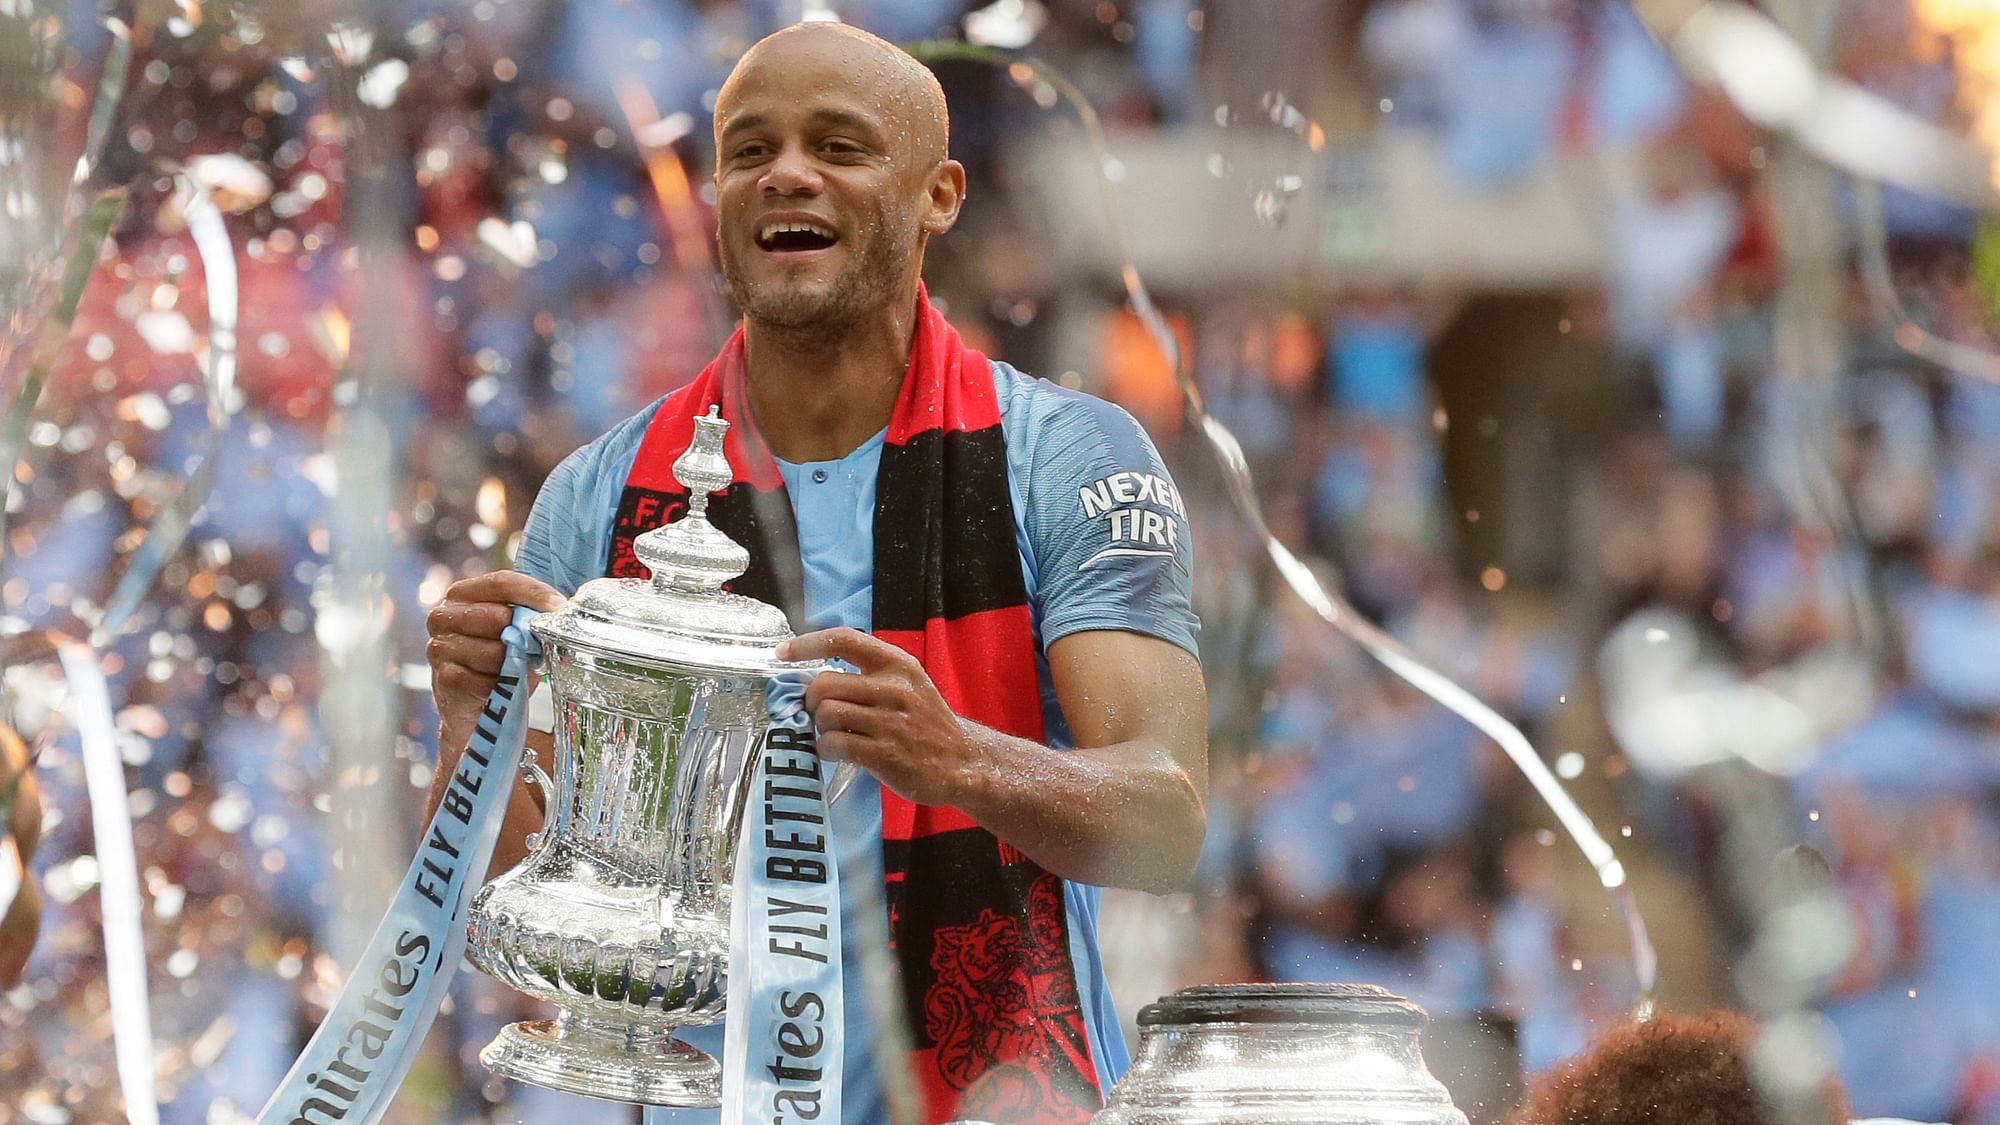 Manchester City’s team captain Vincent Kompany lifts the trophy after winning the English FA Cup Final soccer match between Manchester City and Watford at Wembley stadium in London, Saturday, 18 May 2019.